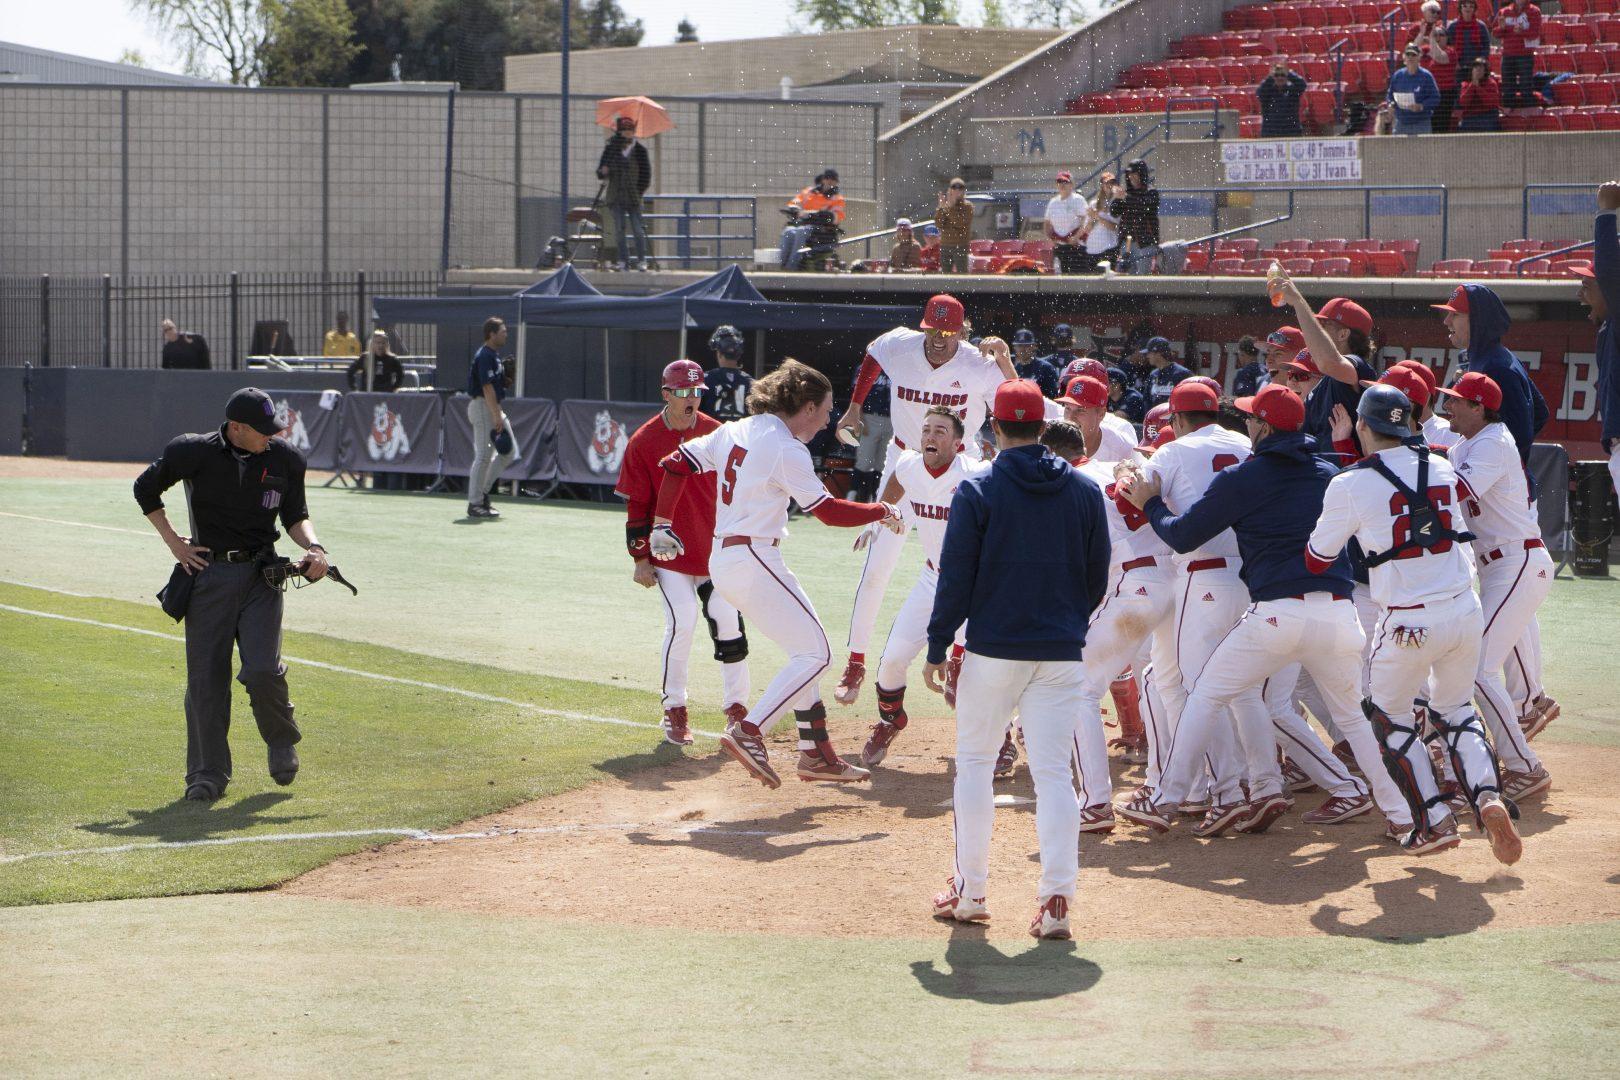 The+Fresno+State+Baseball+team+celebrated+as+Senior+Josh+Lauck+runs+home+after+hitting+the+game+winning+home-run+in+the+second+game+of+the+series+against+Nevada+on+March+20%2C+2022.+%28Wyatt+Bible%2F+The+Collegian%29